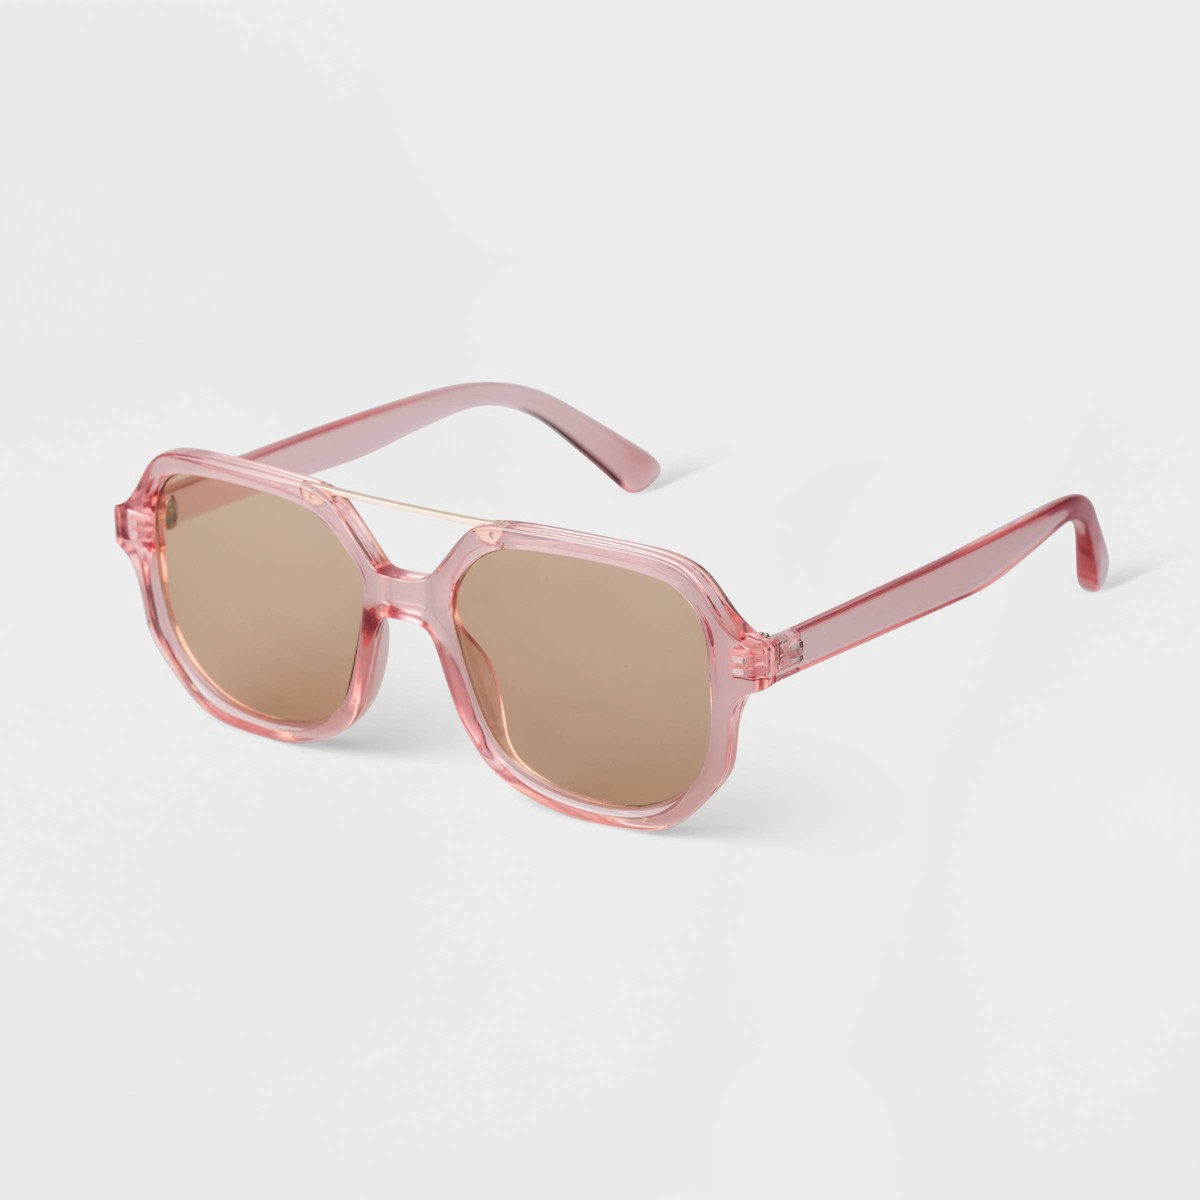 slide 2 of 2, Women's Square Crystal Aviator Sunglasses - A New Day Pink, 1 ct